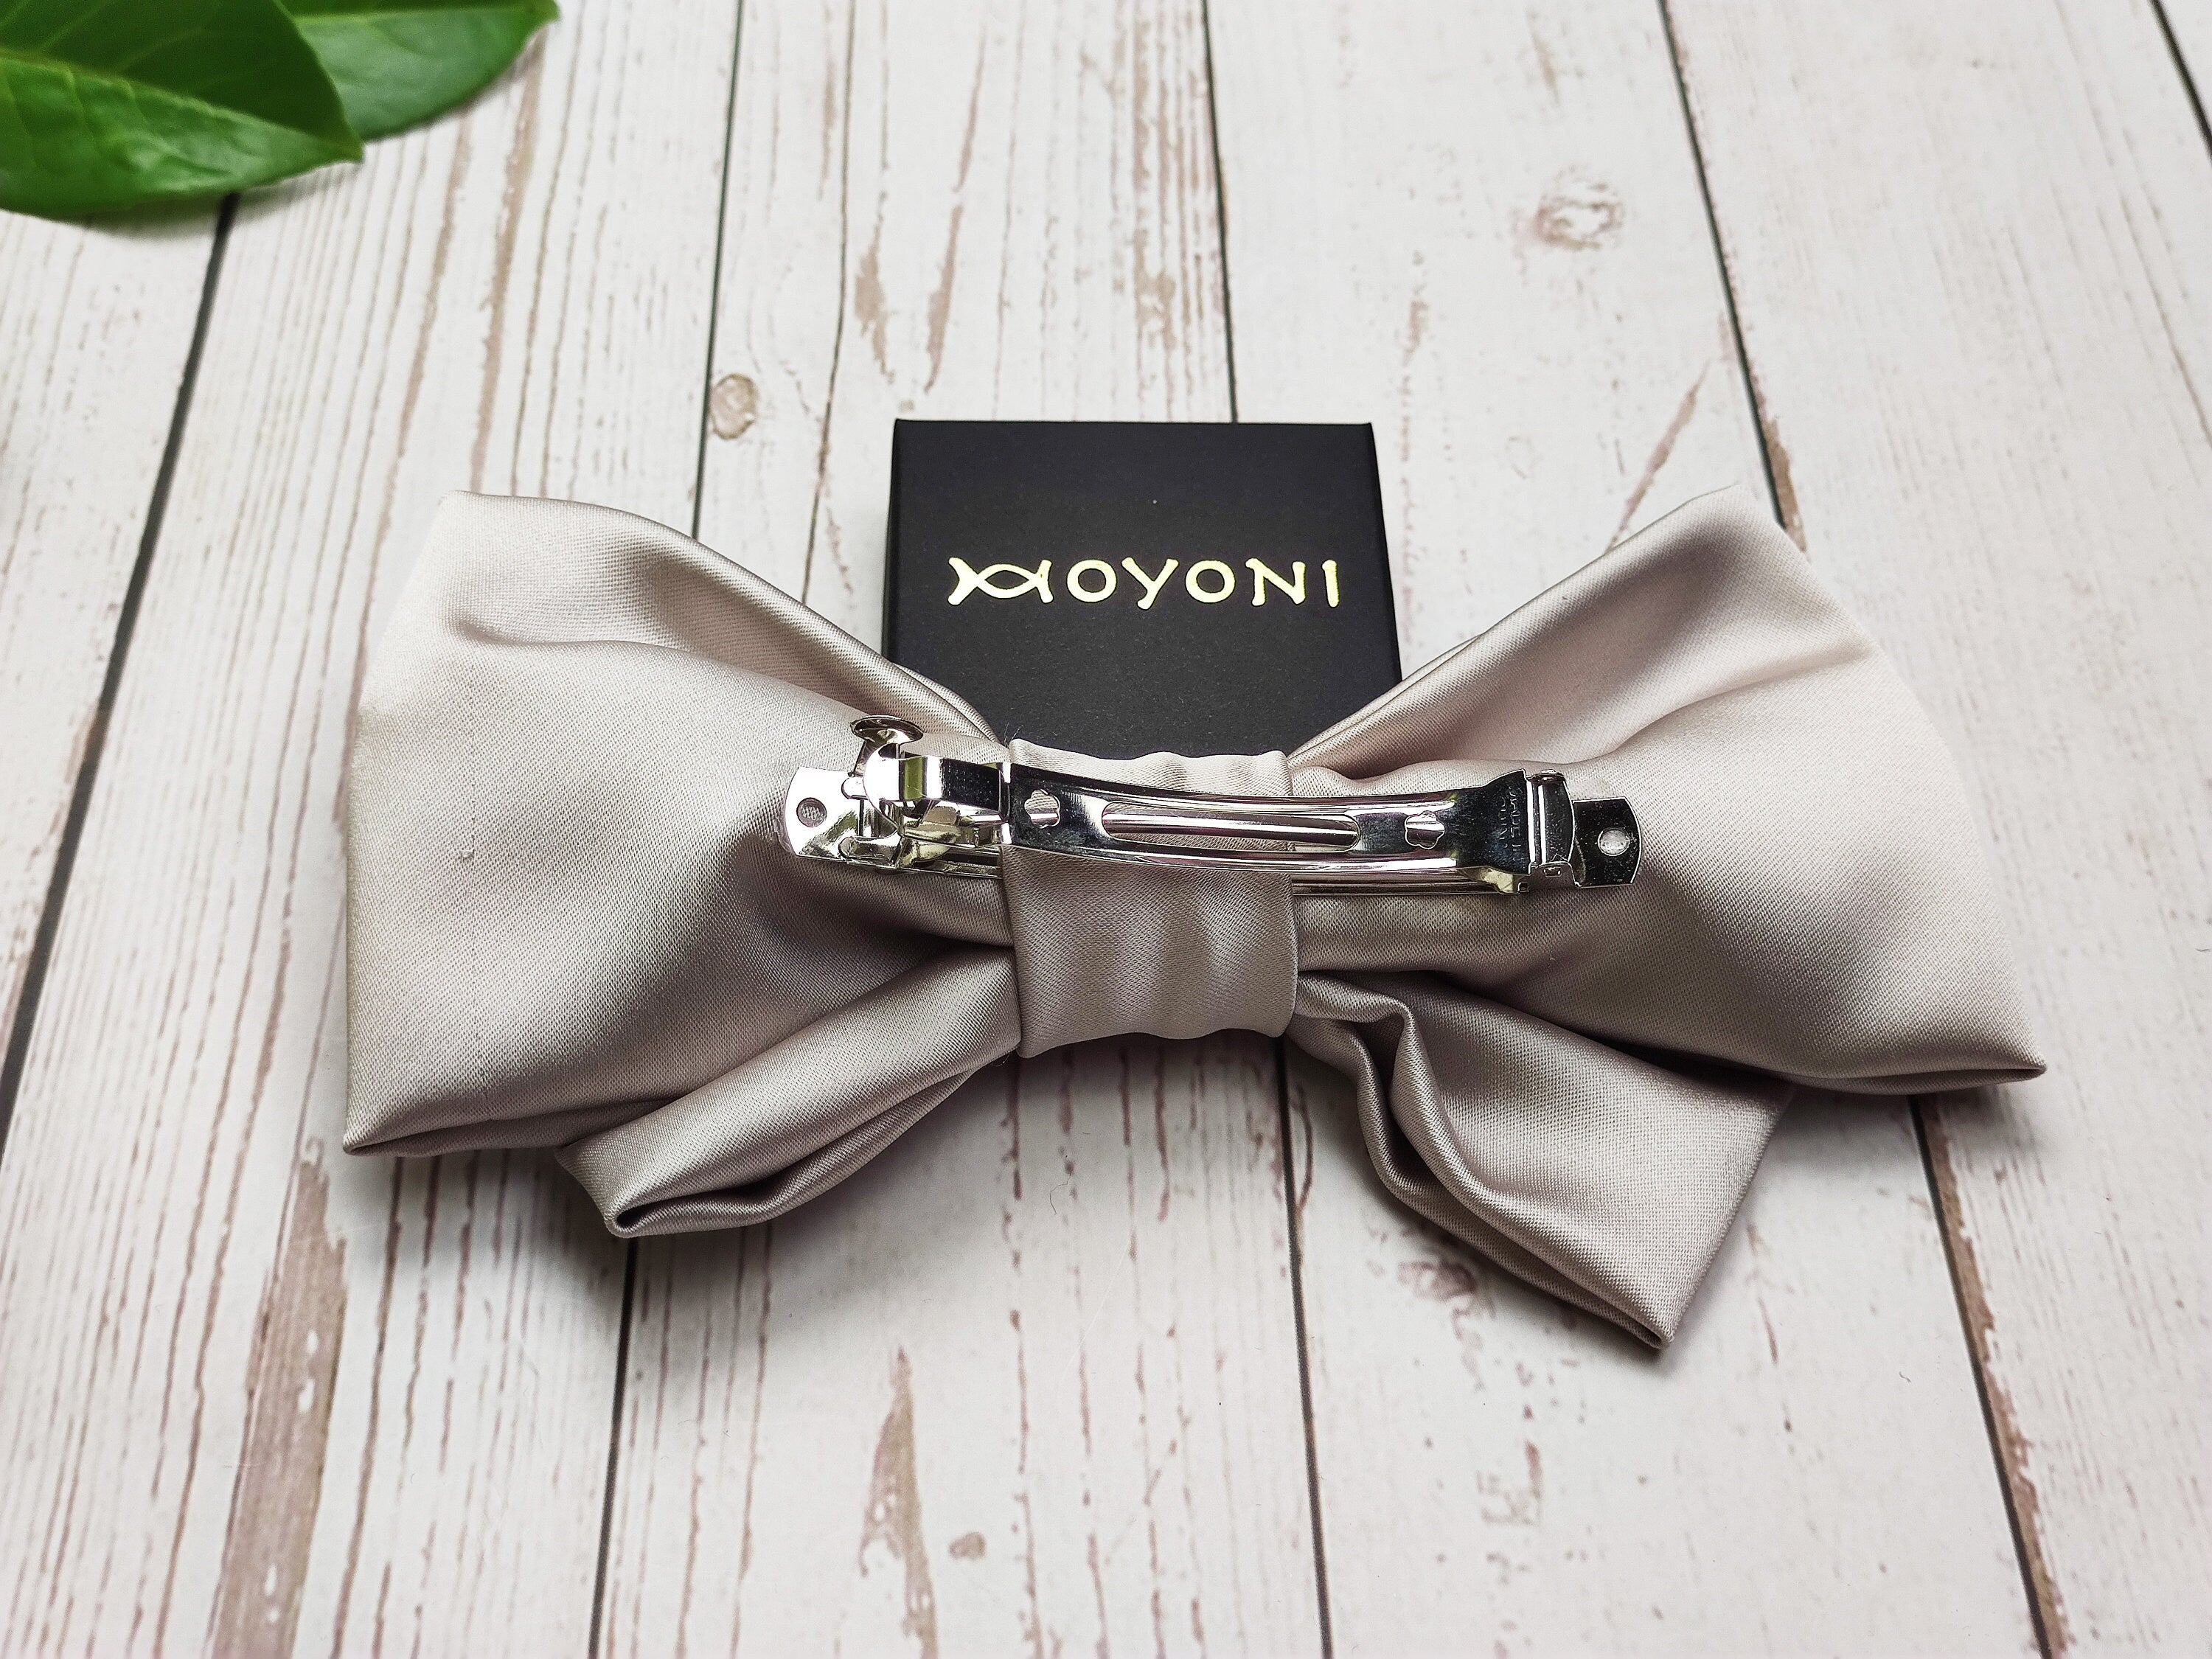 Add a touch of elegance to your hairstyle with these handmade brick and beige satin hair clips with a bow. The soft satin material and fashionable design make them a comfortable and stylish choice for any occasion.